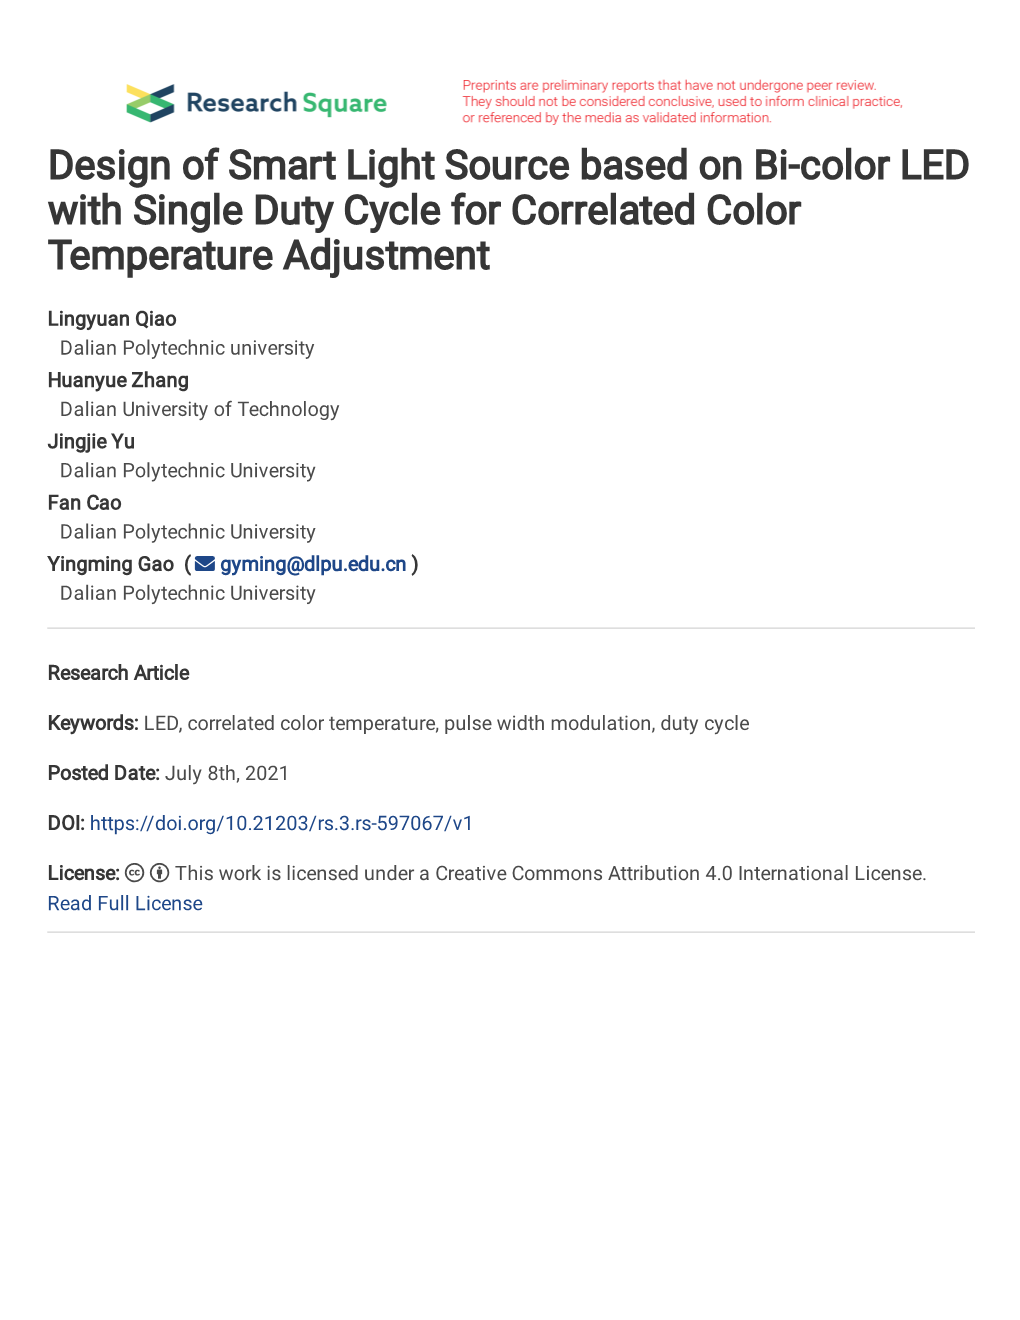 Design of Smart Light Source Based on Bi-Color LED with Single Duty Cycle for Correlated Color Temperature Adjustment